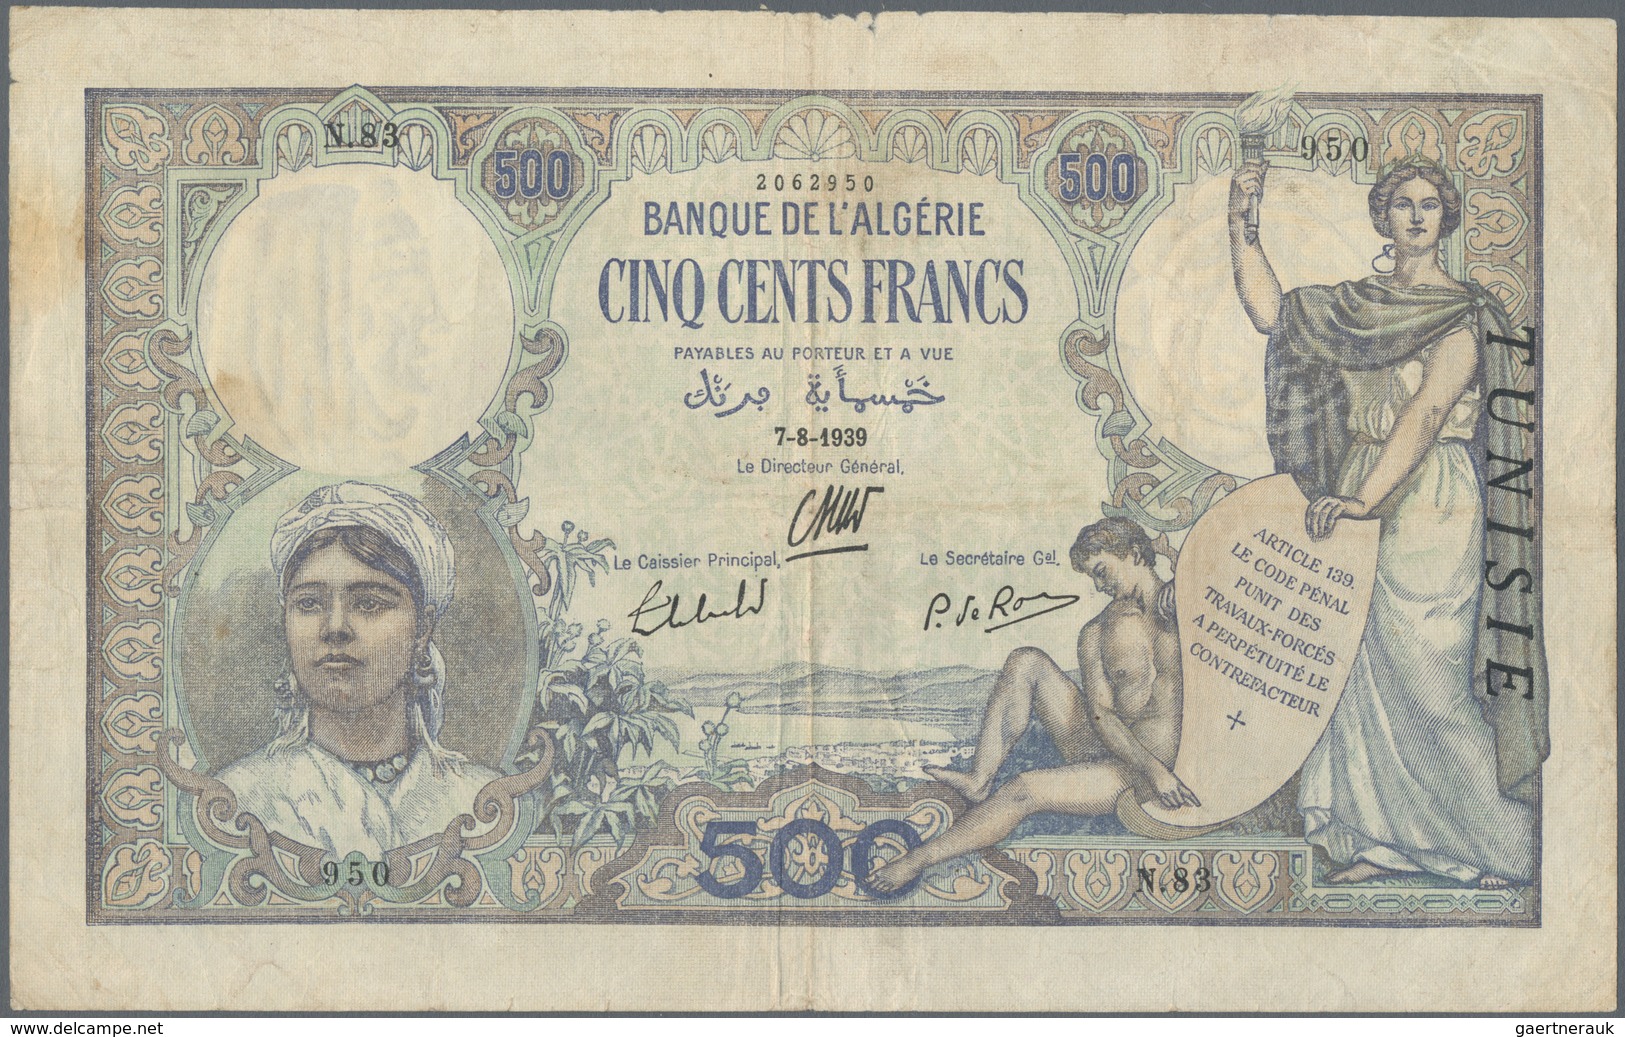 Tunisia / Tunisien: 500 Francs 1939 P. 14, Used With Several Folds And Creases, Minor Pinholes, Ligh - Tunesien